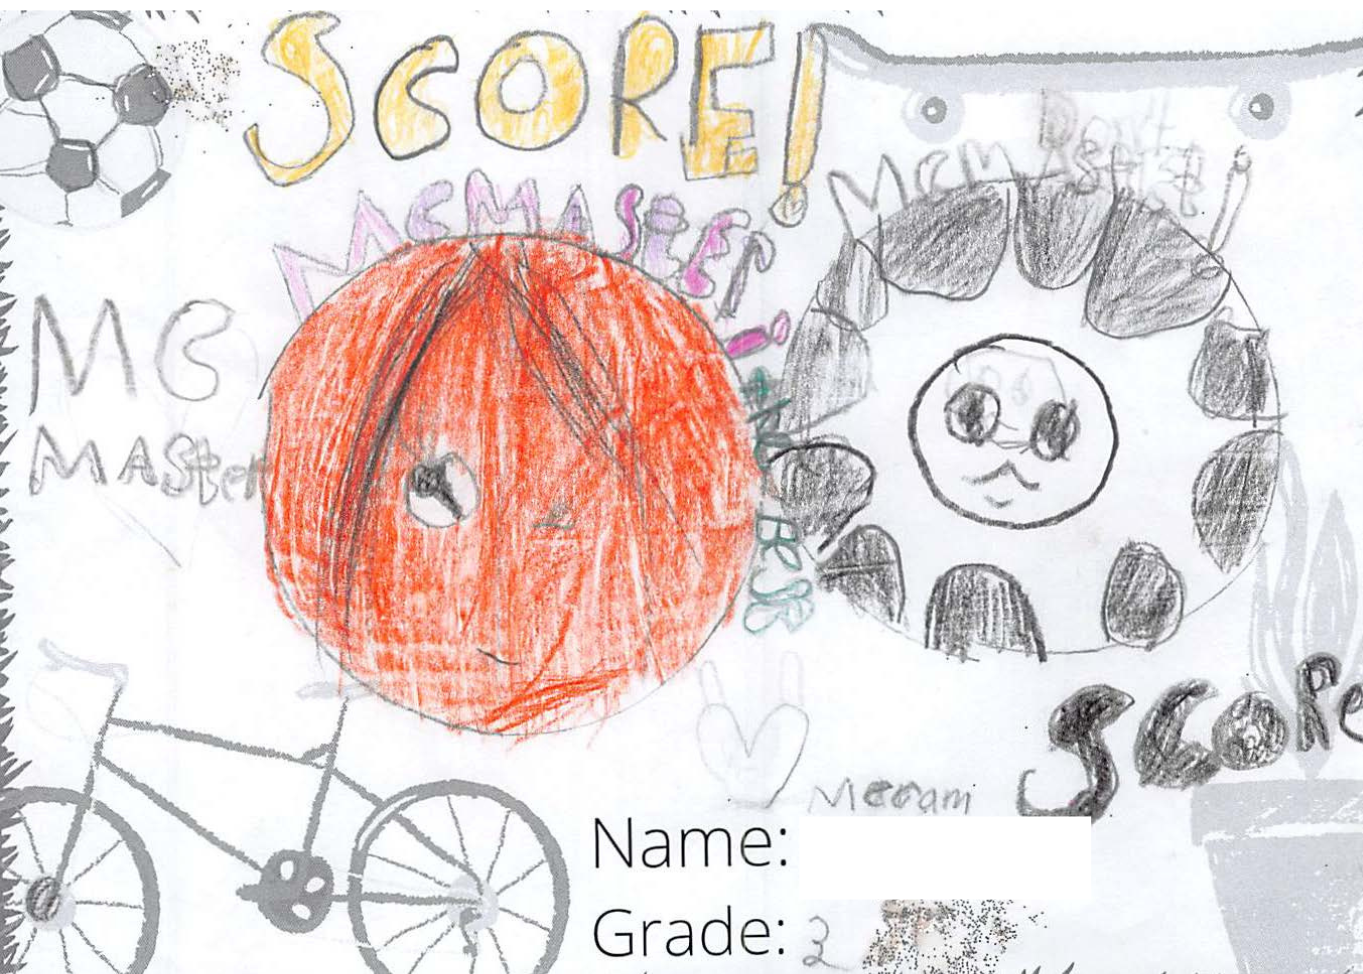 Pencil crayon drawing for the SCORE! logo contest. The drawing includes a basketball and soccer ball.